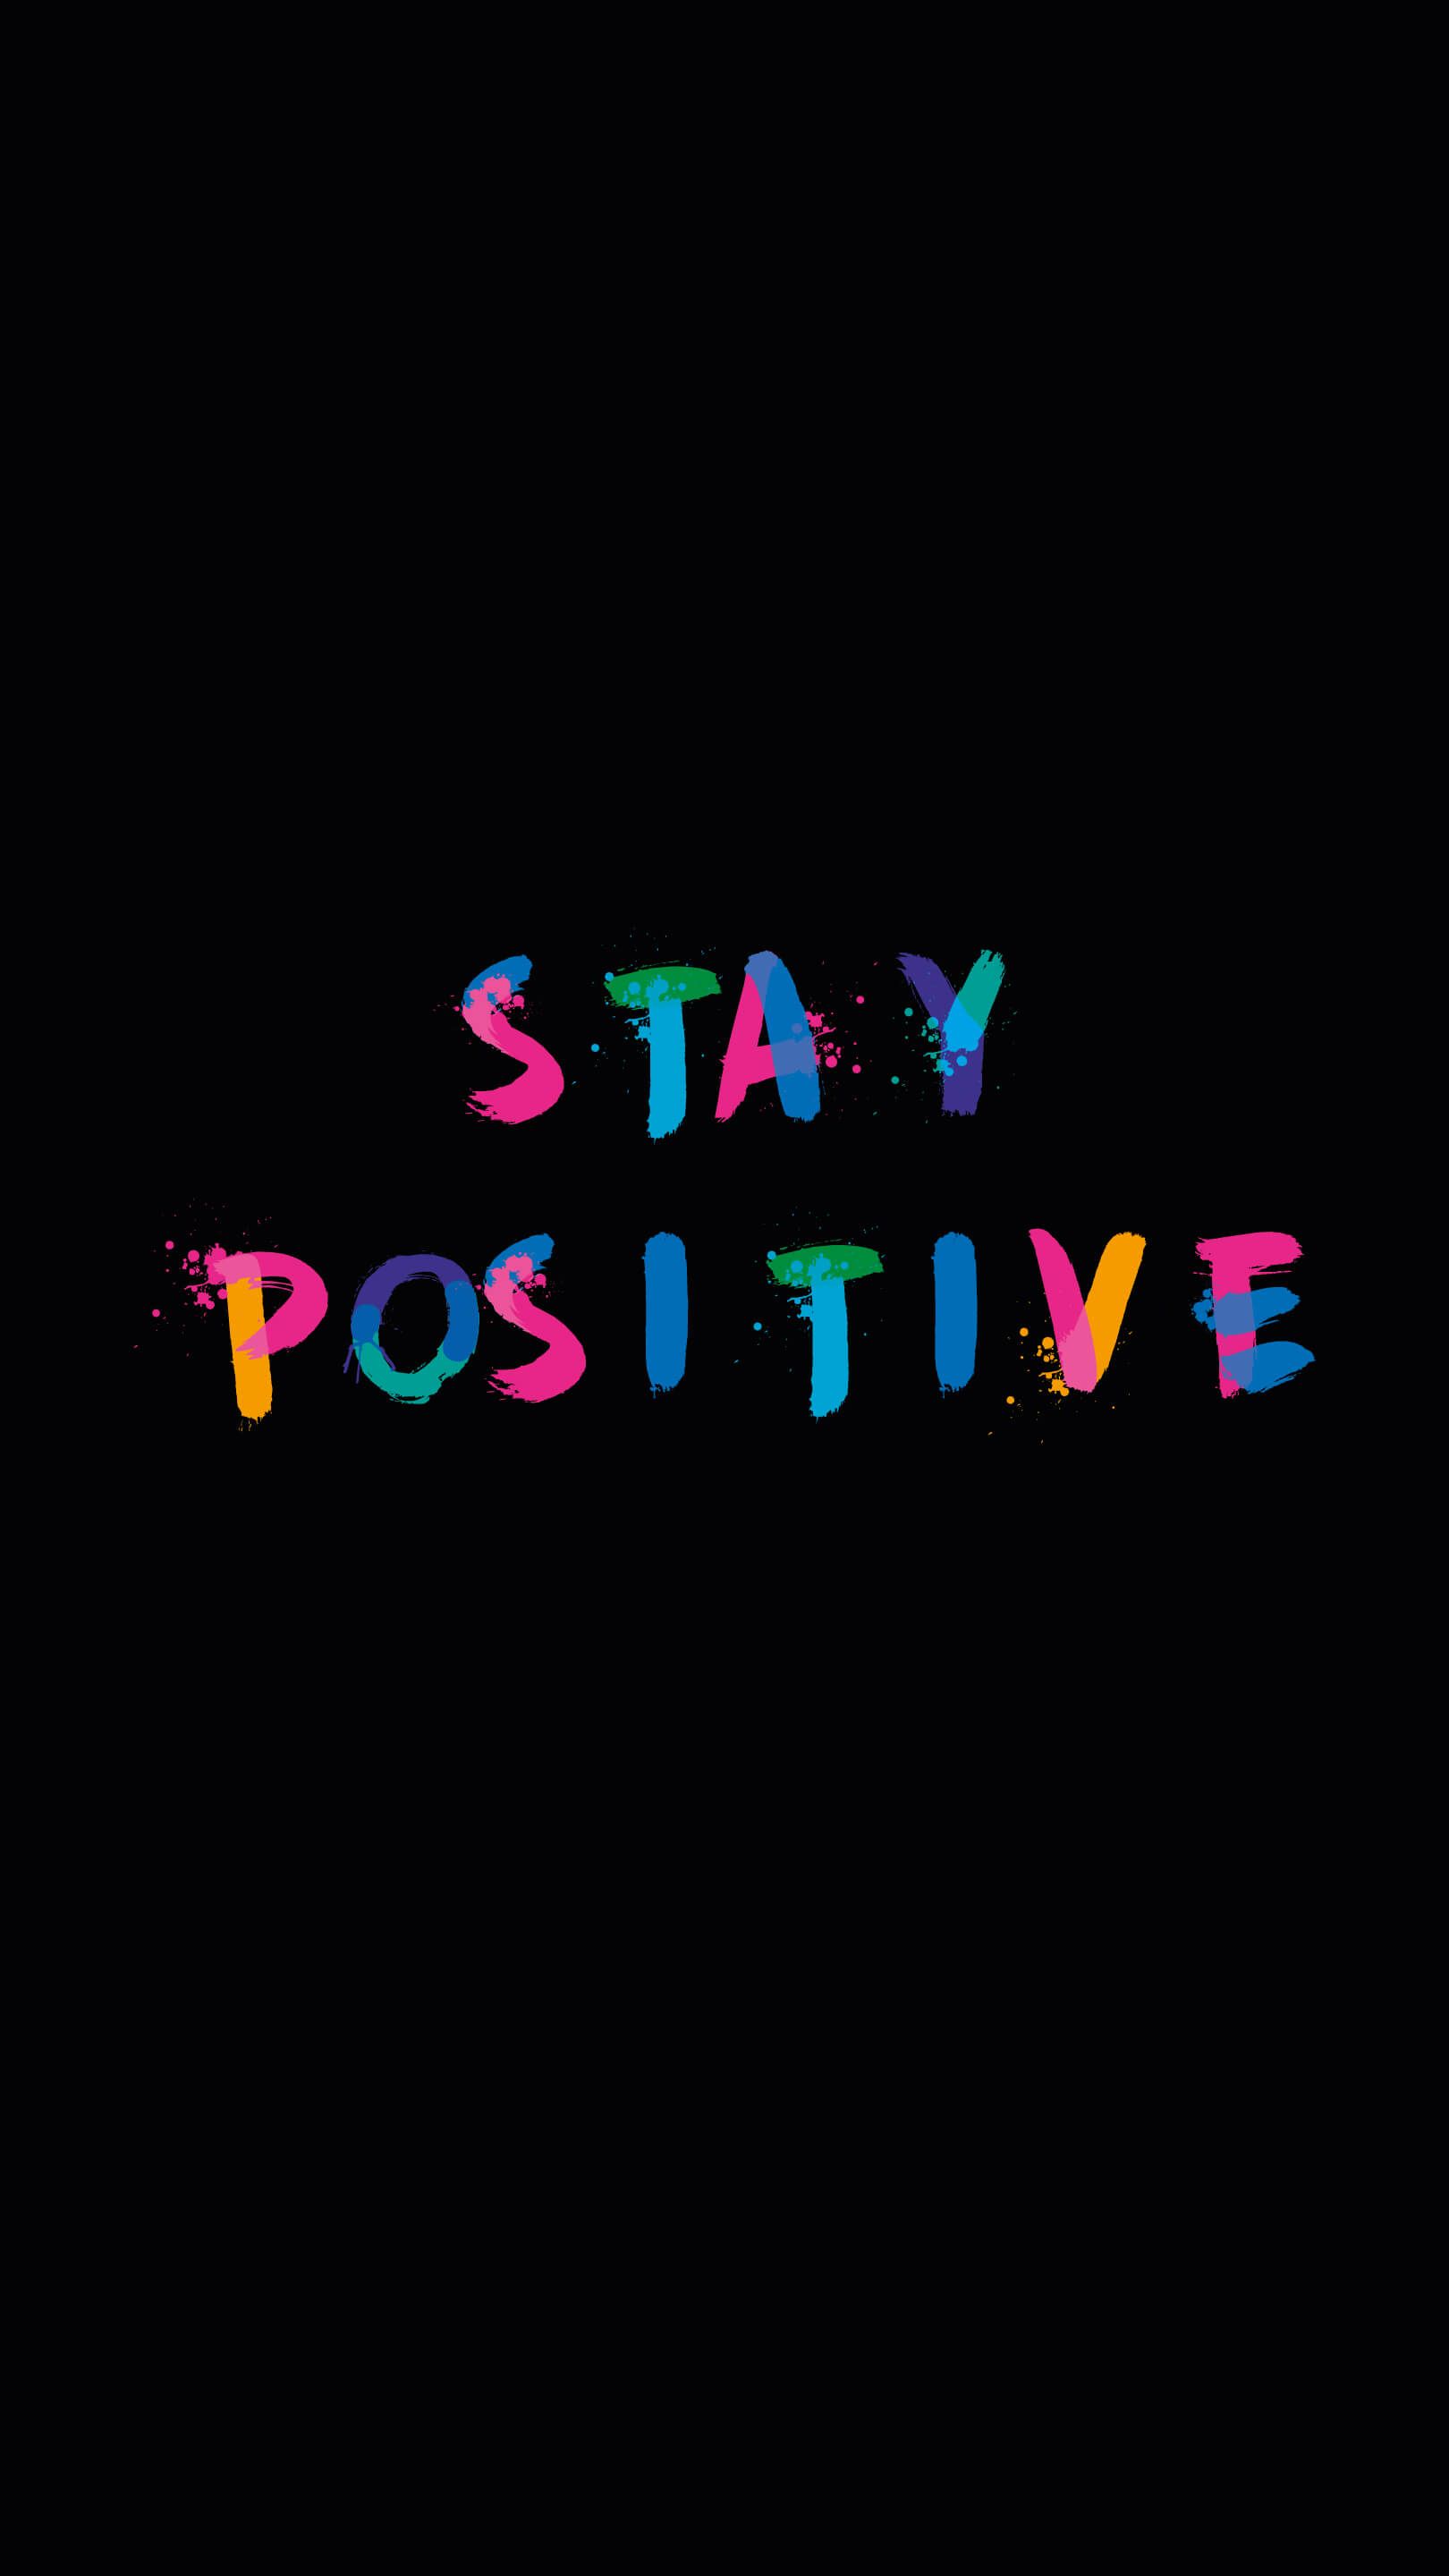 Stay Positive IPhone Wallpaper Wallpaper. Graffiti Wallpaper Iphone, Words Wallpaper, Motivational Quotes Wallpaper